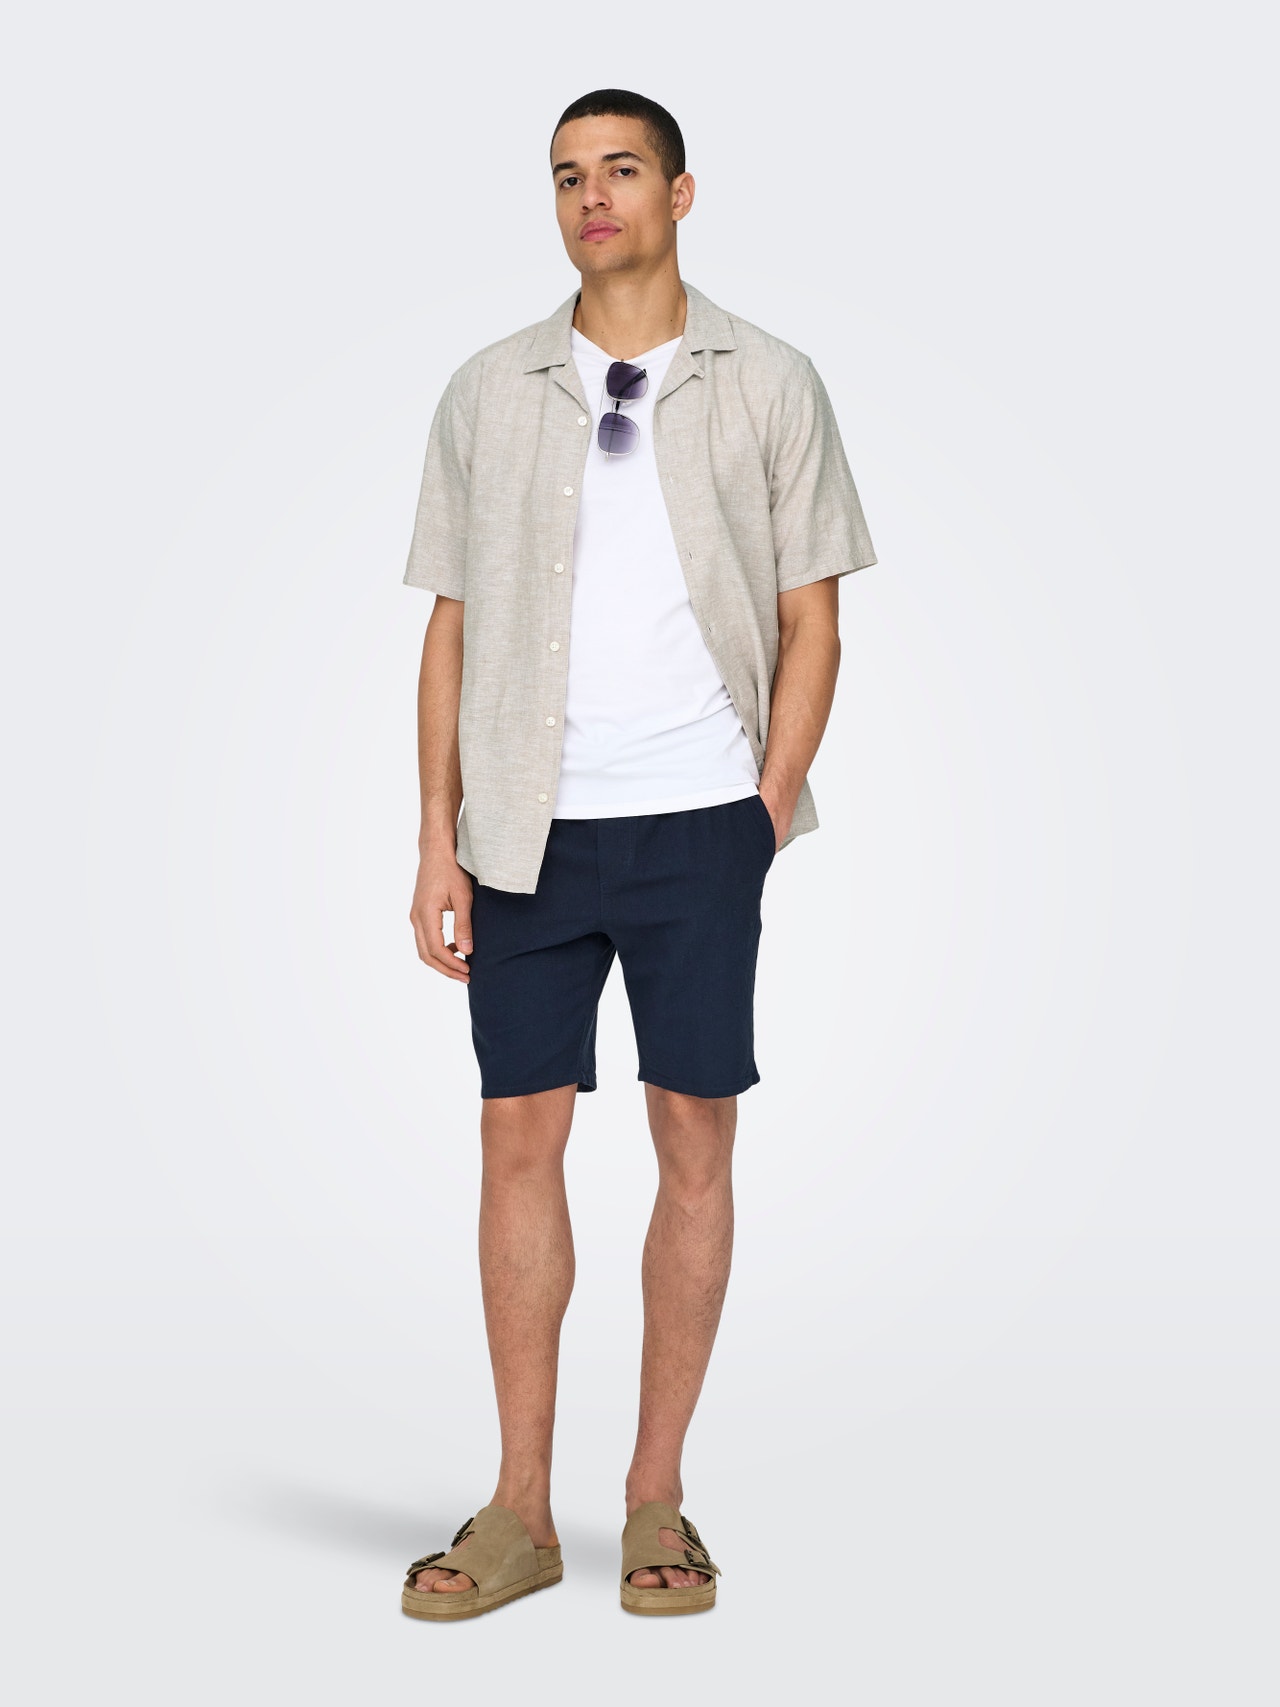 ONLY & SONS Shorts Loose Fit -Dark Navy - 22024967